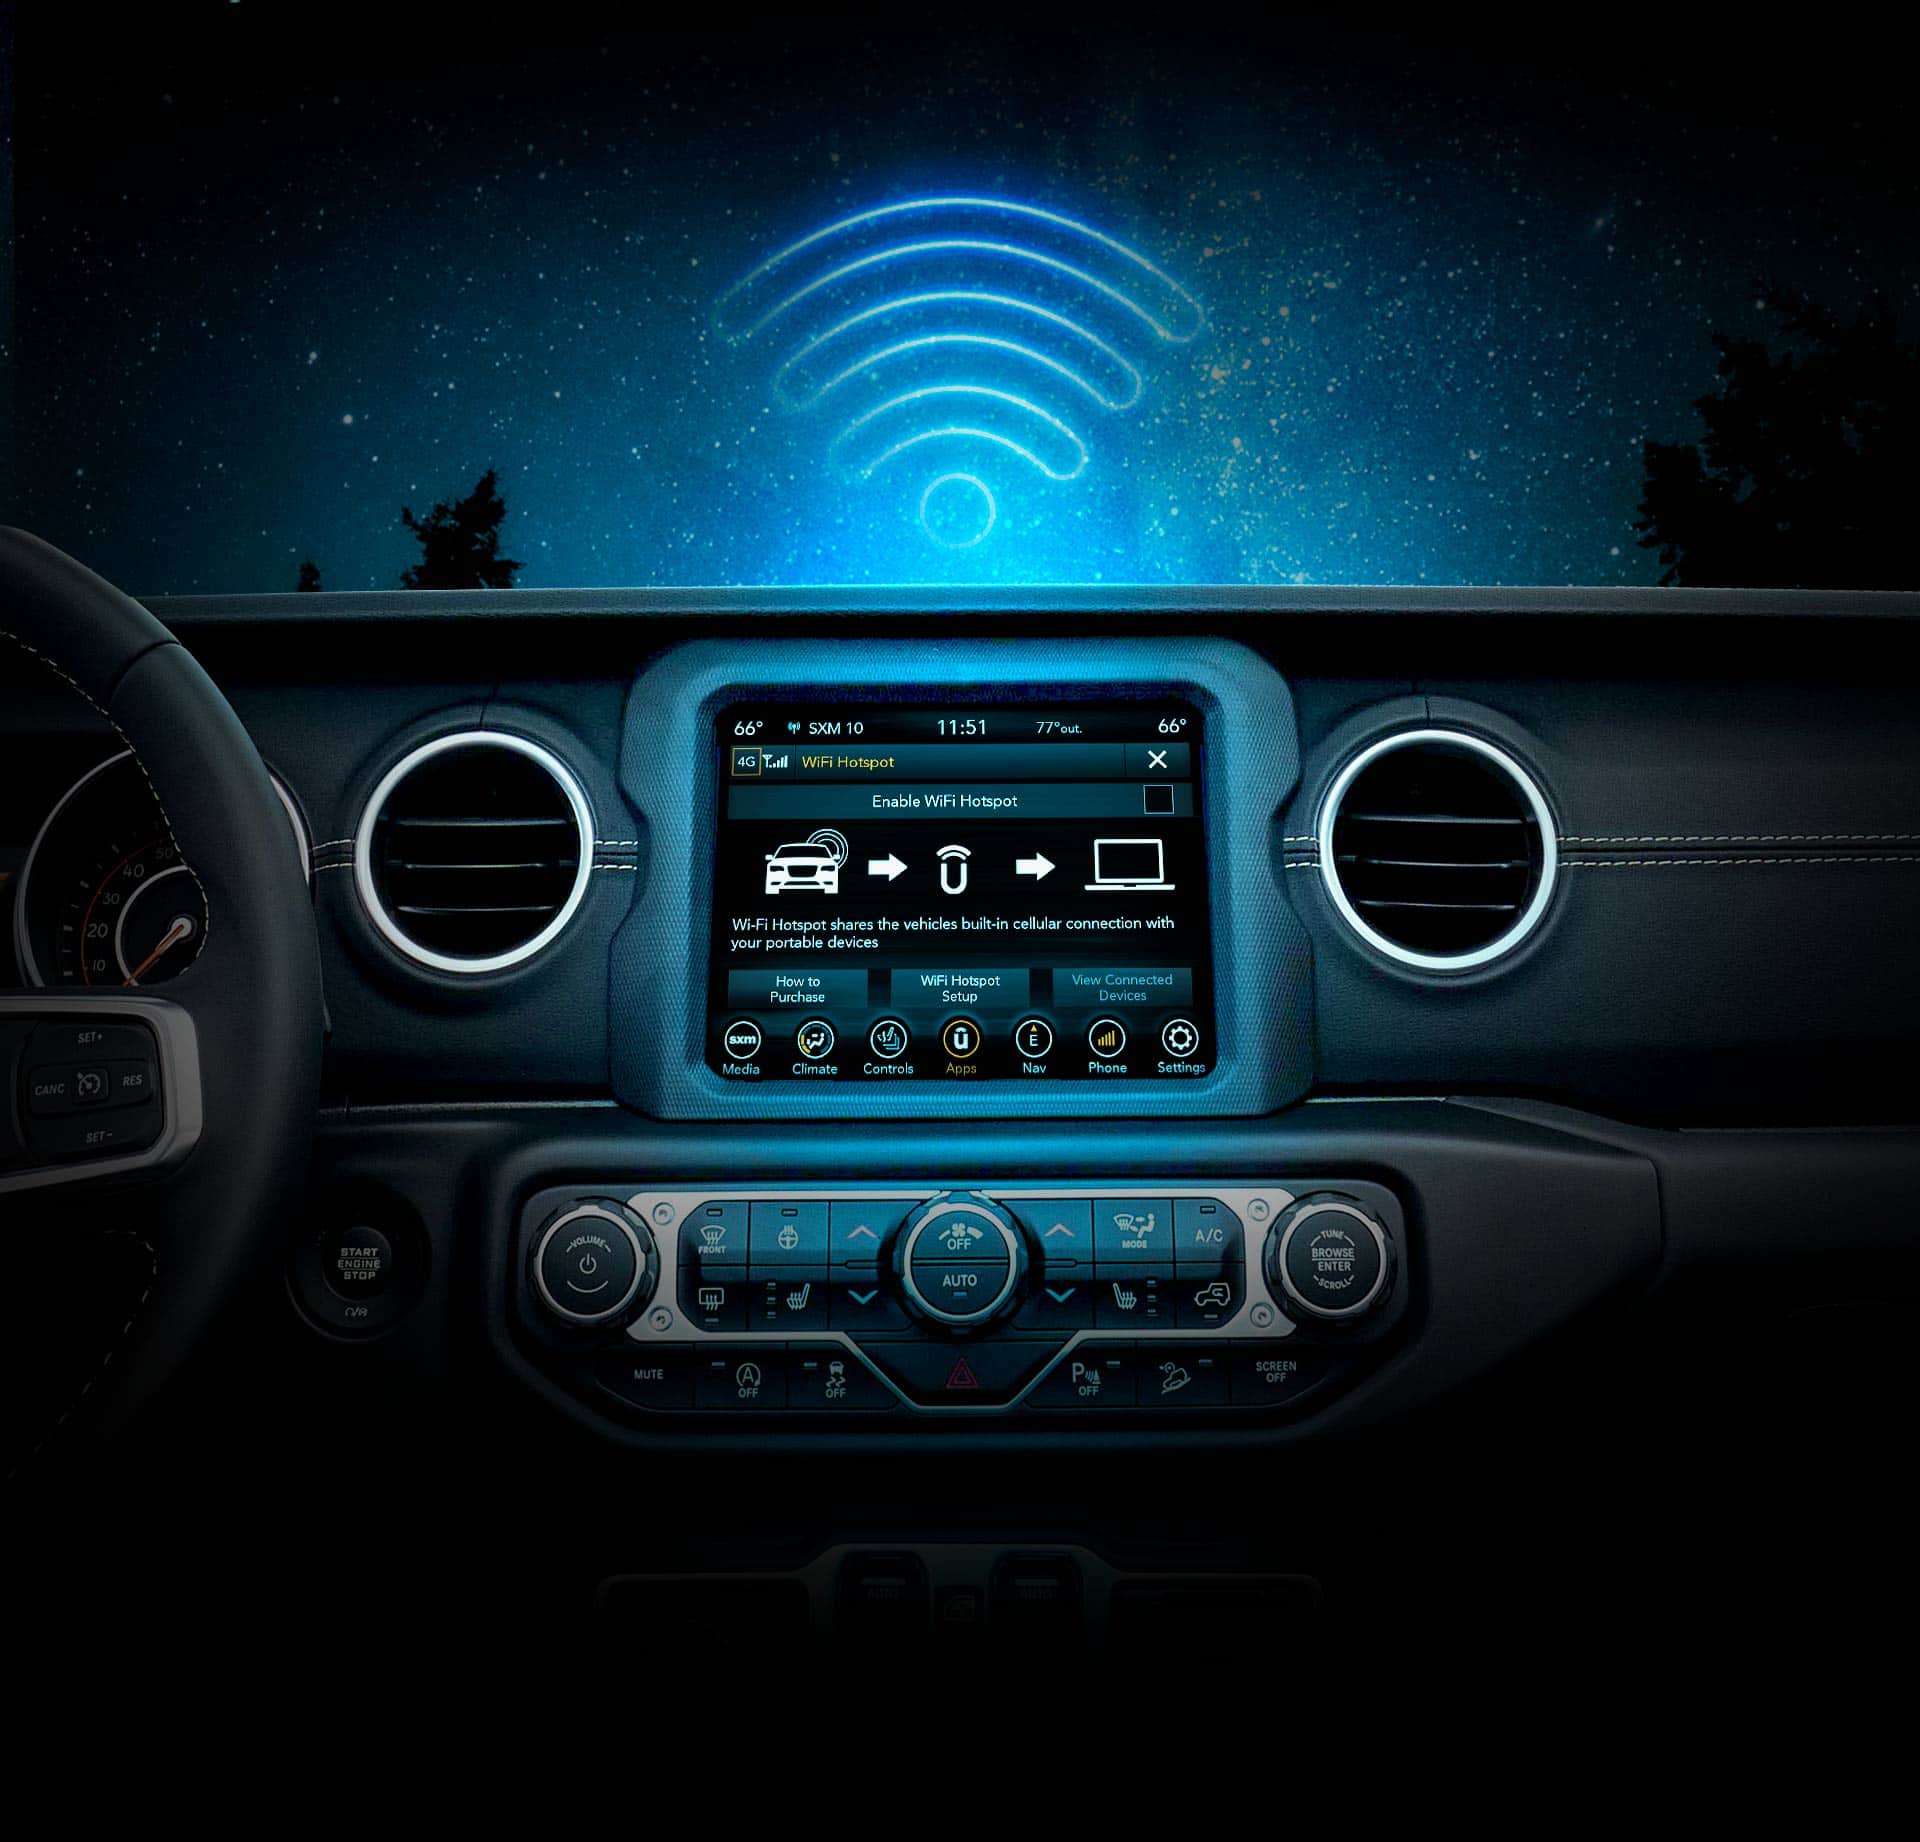 2023 Jeep® Wrangler Technology - Uconnect, CarPlay & More